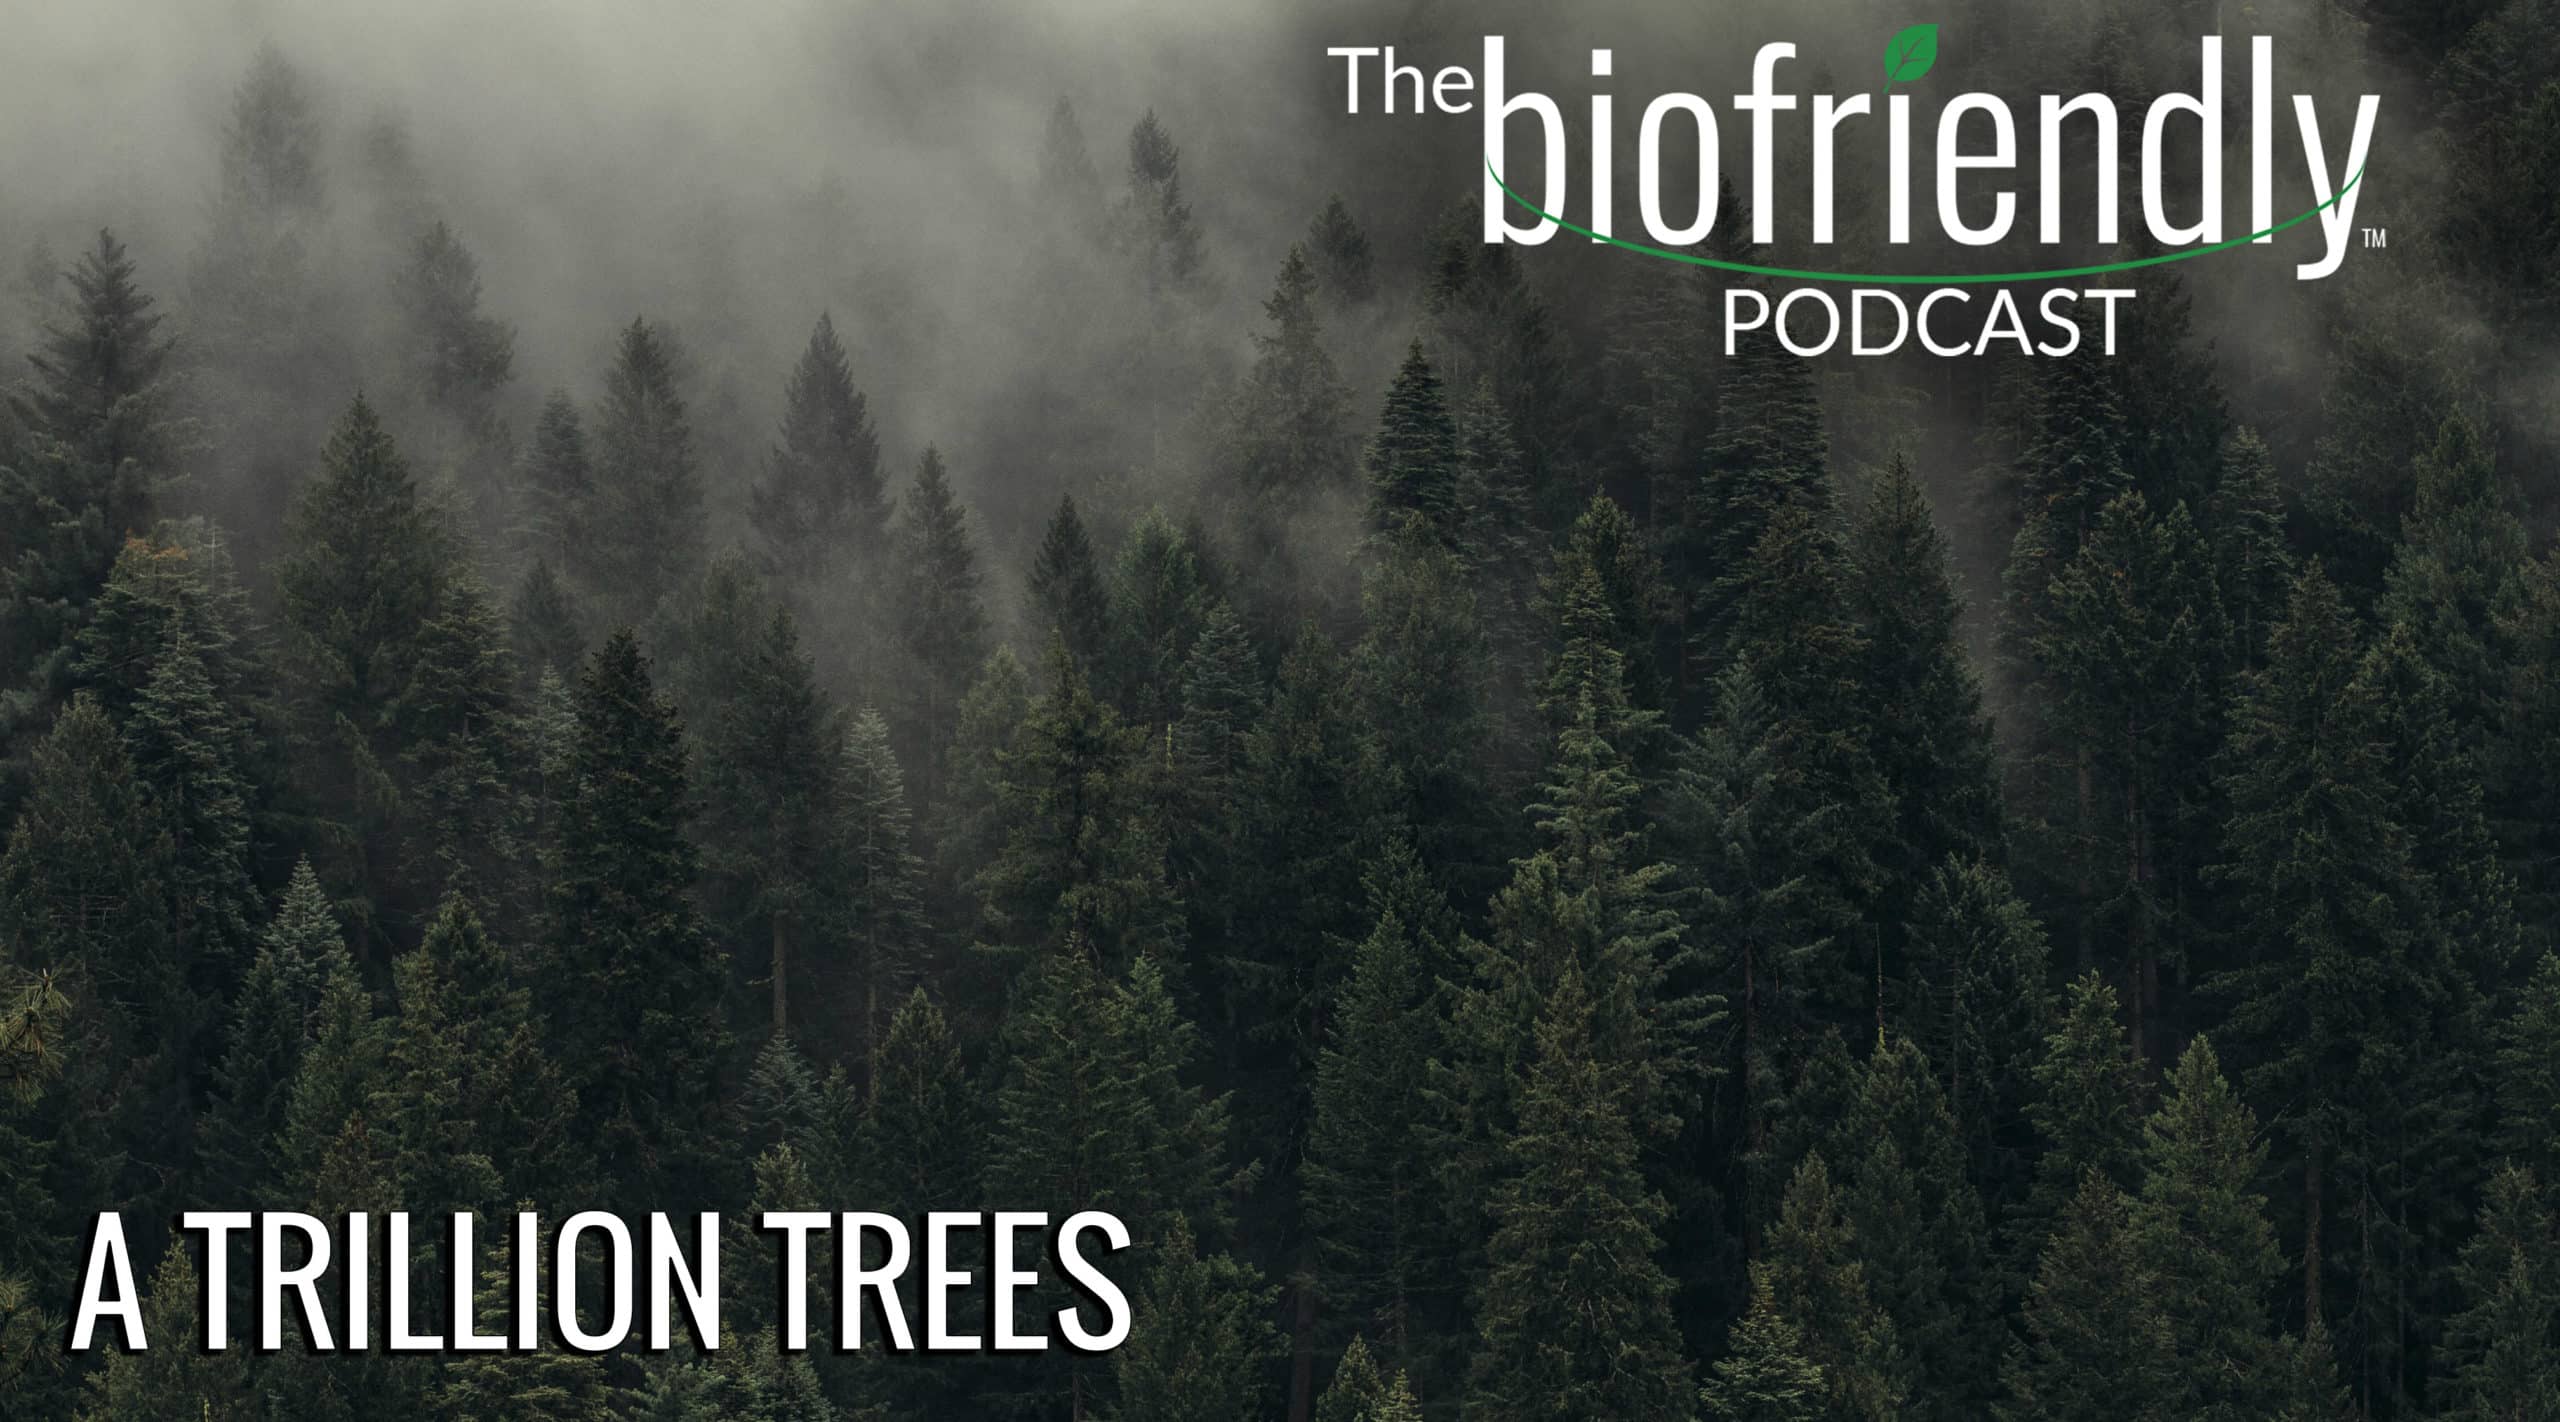 The Biofriendly Podcast - Episode 34 - A Trillion Trees